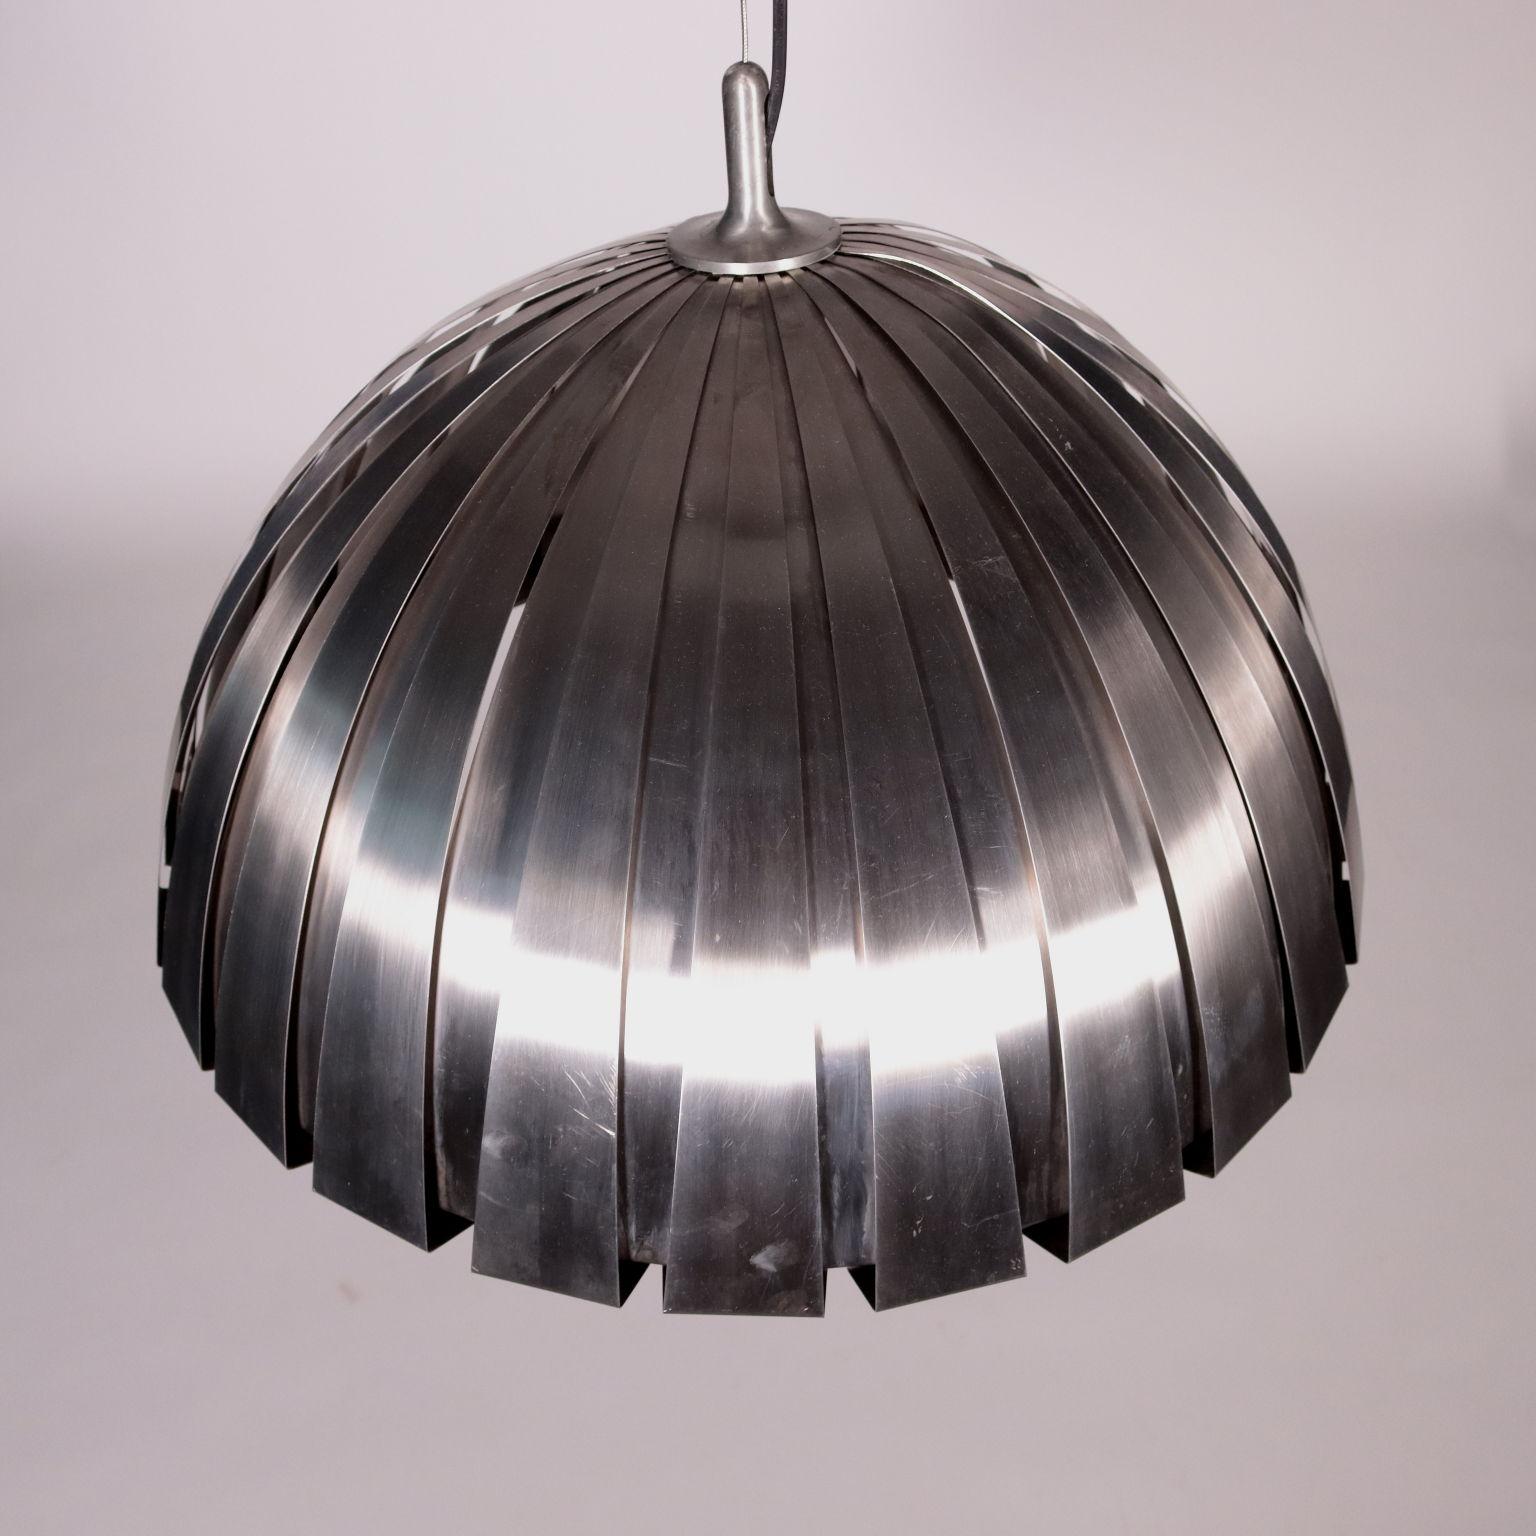 Lamp Elio Martinelli Chromed Metal, Italy, 1960s 1970s In Good Condition For Sale In Milano, IT